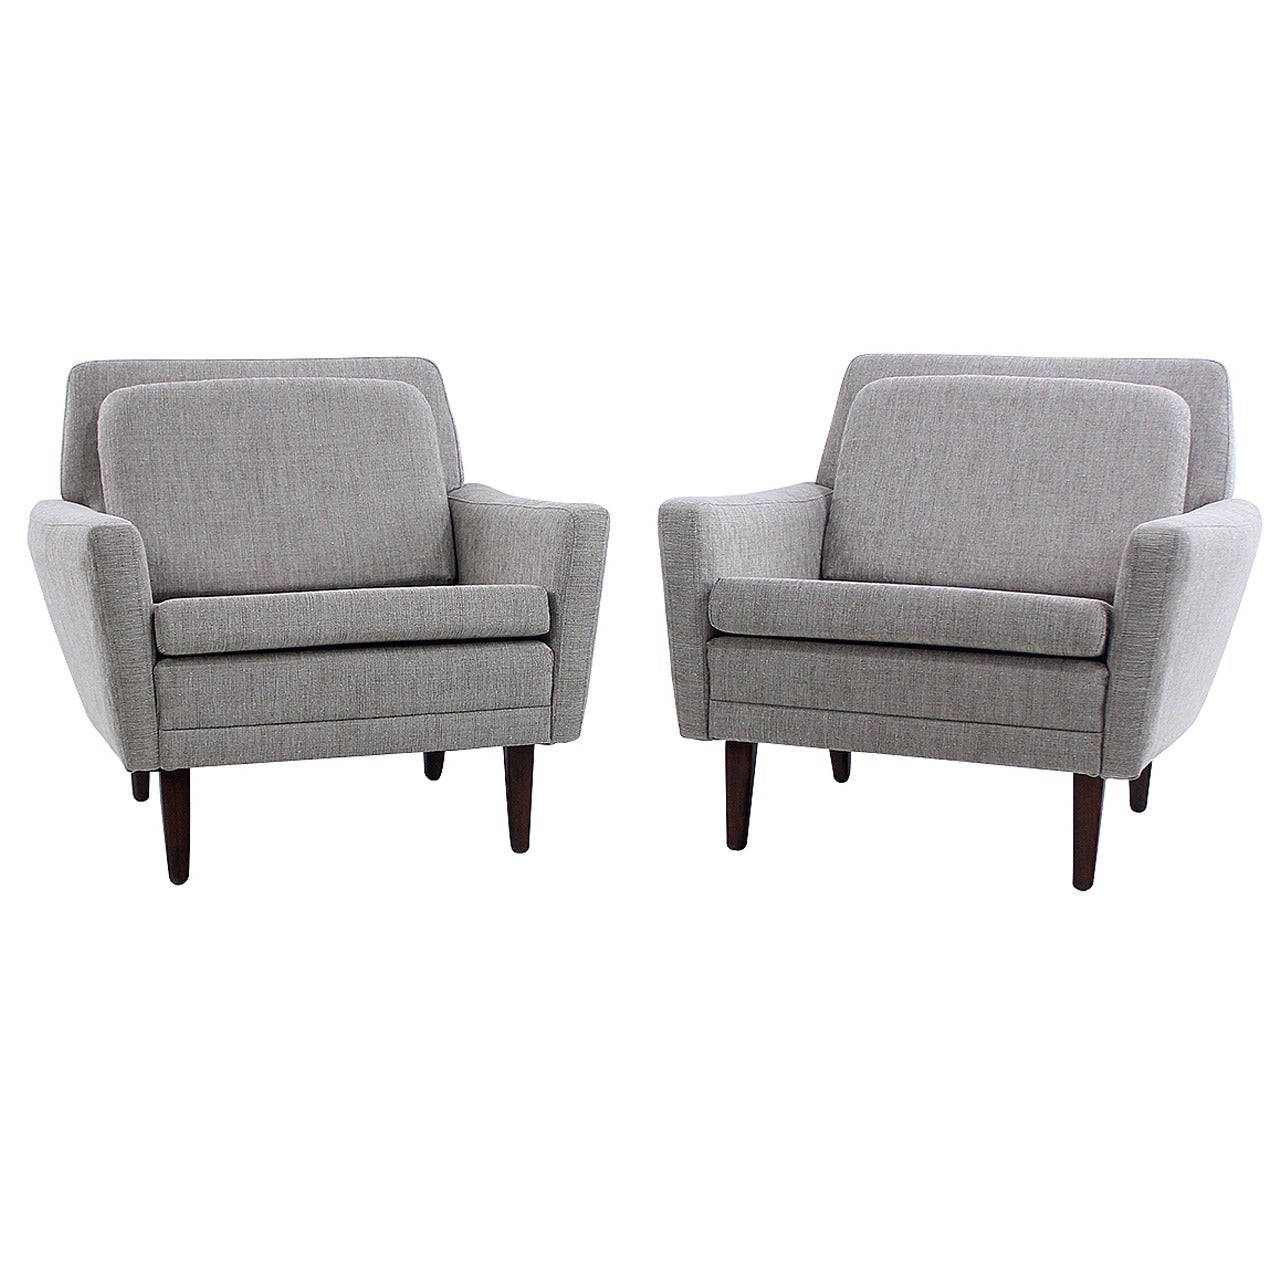 Pair of Danish Modern Armchairs Designed by Folke Ohlsson for DUX For Sale